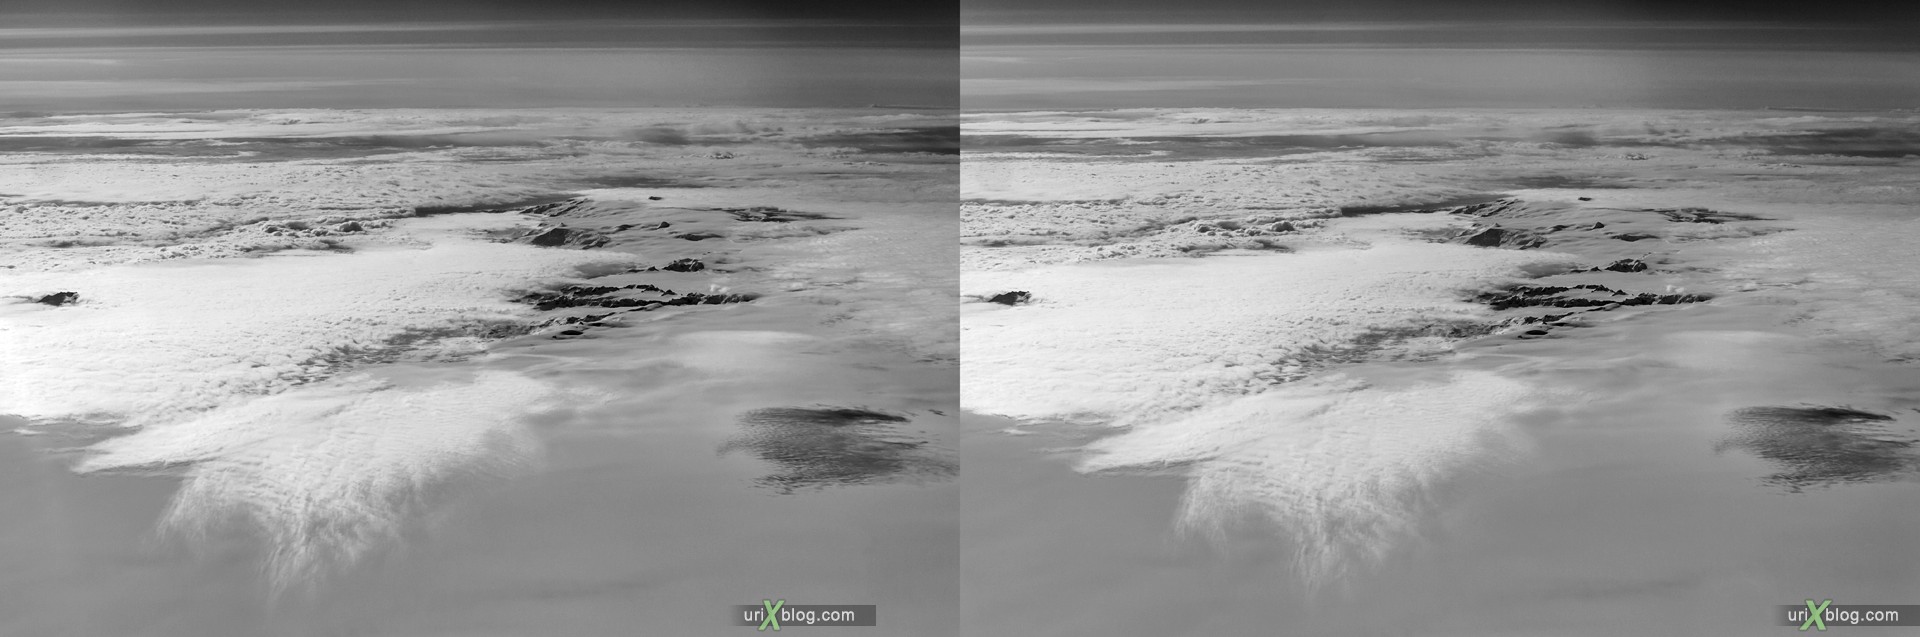 2013, Iceland, mountains, panorama, airplane, black and white, bw, snow, ice, clouds, horizon, 3D, stereo pair, cross-eyed, crossview, cross view stereo pair, stereoscopic